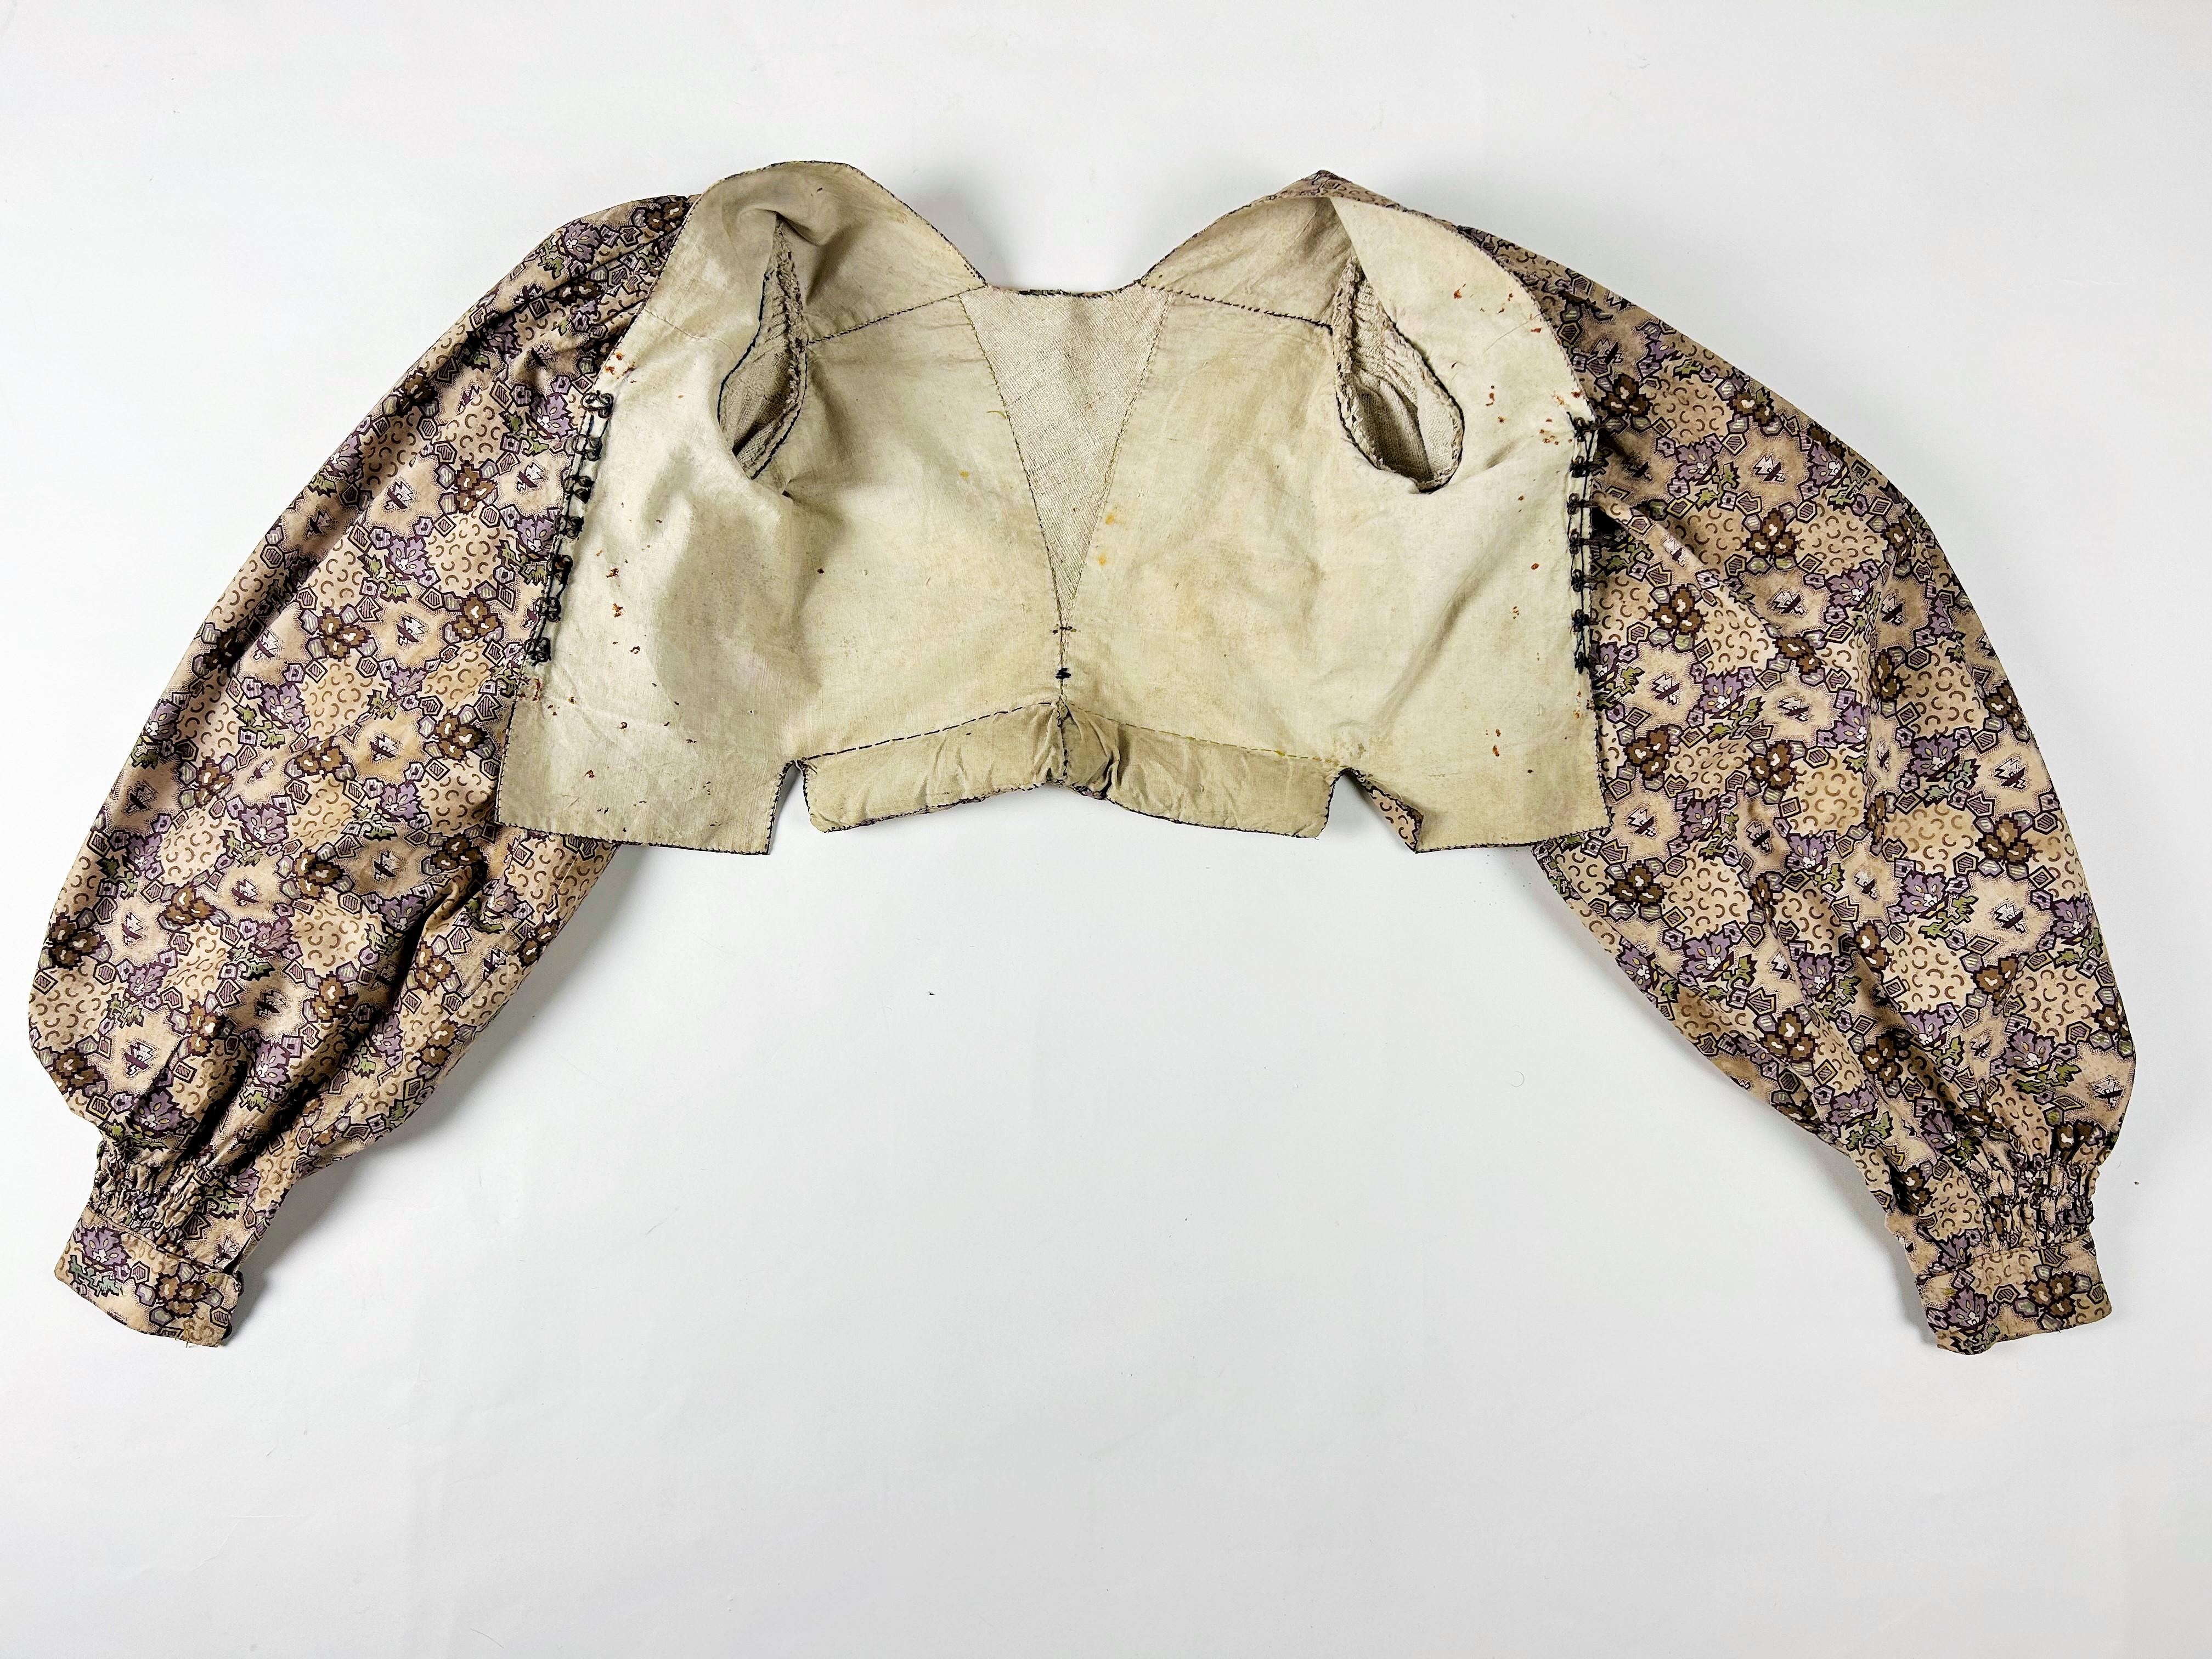 Circa 1830
France or Provence

Amazing Indian and unbleached linen camisole with interesting beading and ties allowing the skirt to be positioned in the back and dating from the Romantic period. Obvious influence of the Paris fashion for this